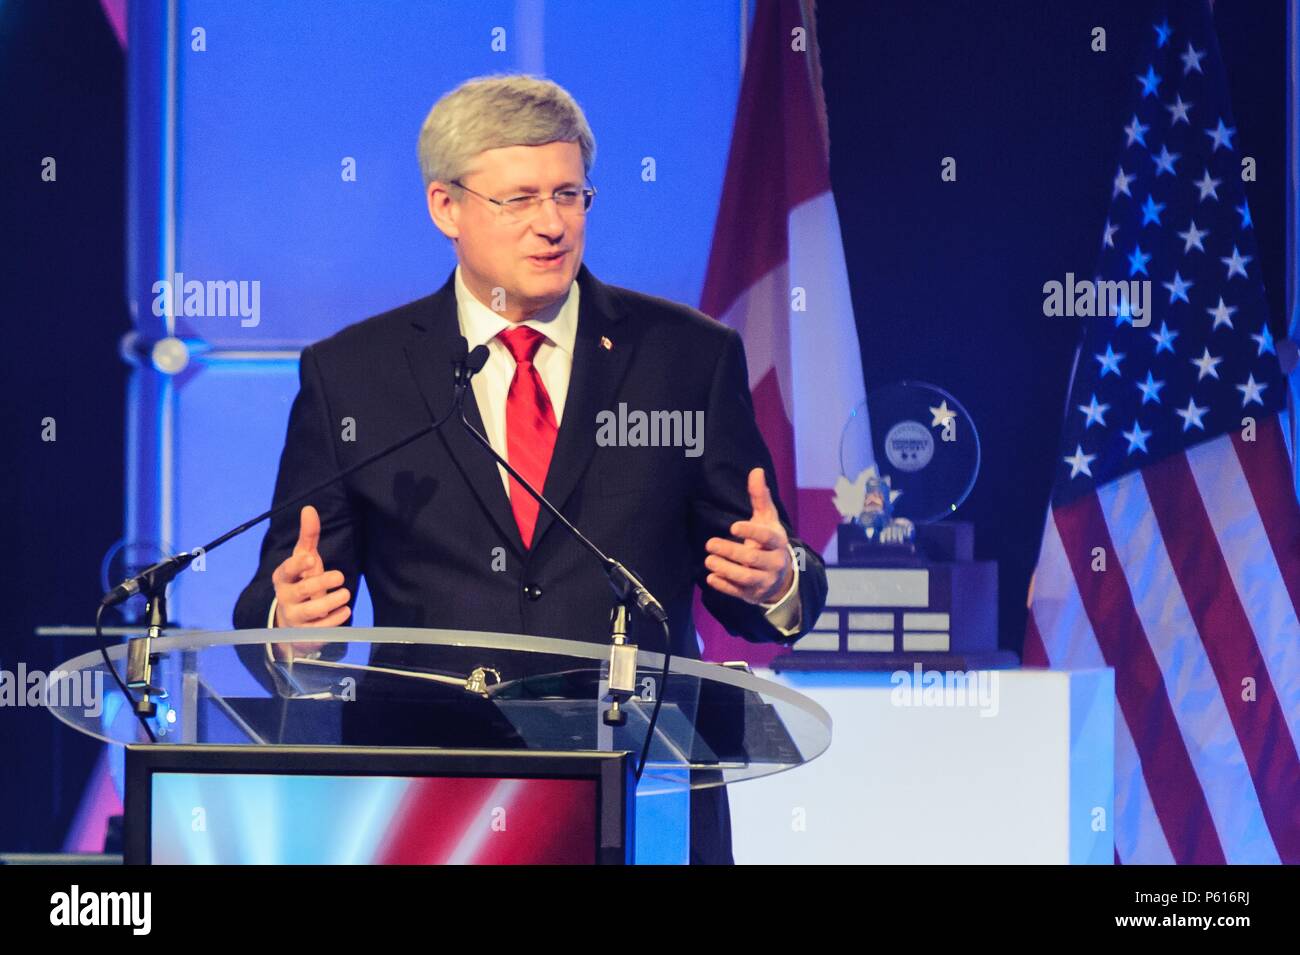 March 18, 2014 - OTTAWA, CA, 28 June 2018 - FILE PHOTO - Canadian television network CTV has uncovered documents that reveal that former Canadian Prime Minister Stephen Harper has covertly scheduled meetings at the White House with Cabinet officials, just as Canadian retaliatory tariffs are about to take effect. The visit has not been coordinated with Canadian officials at the Prime Minister's office, Foreign Affairs, or any traditional participants in such trips. CTV reports that Harper, who lost office to current PM, Justin Trudeau in a 2015 election, is scheduled to meet with National Secur Stock Photo